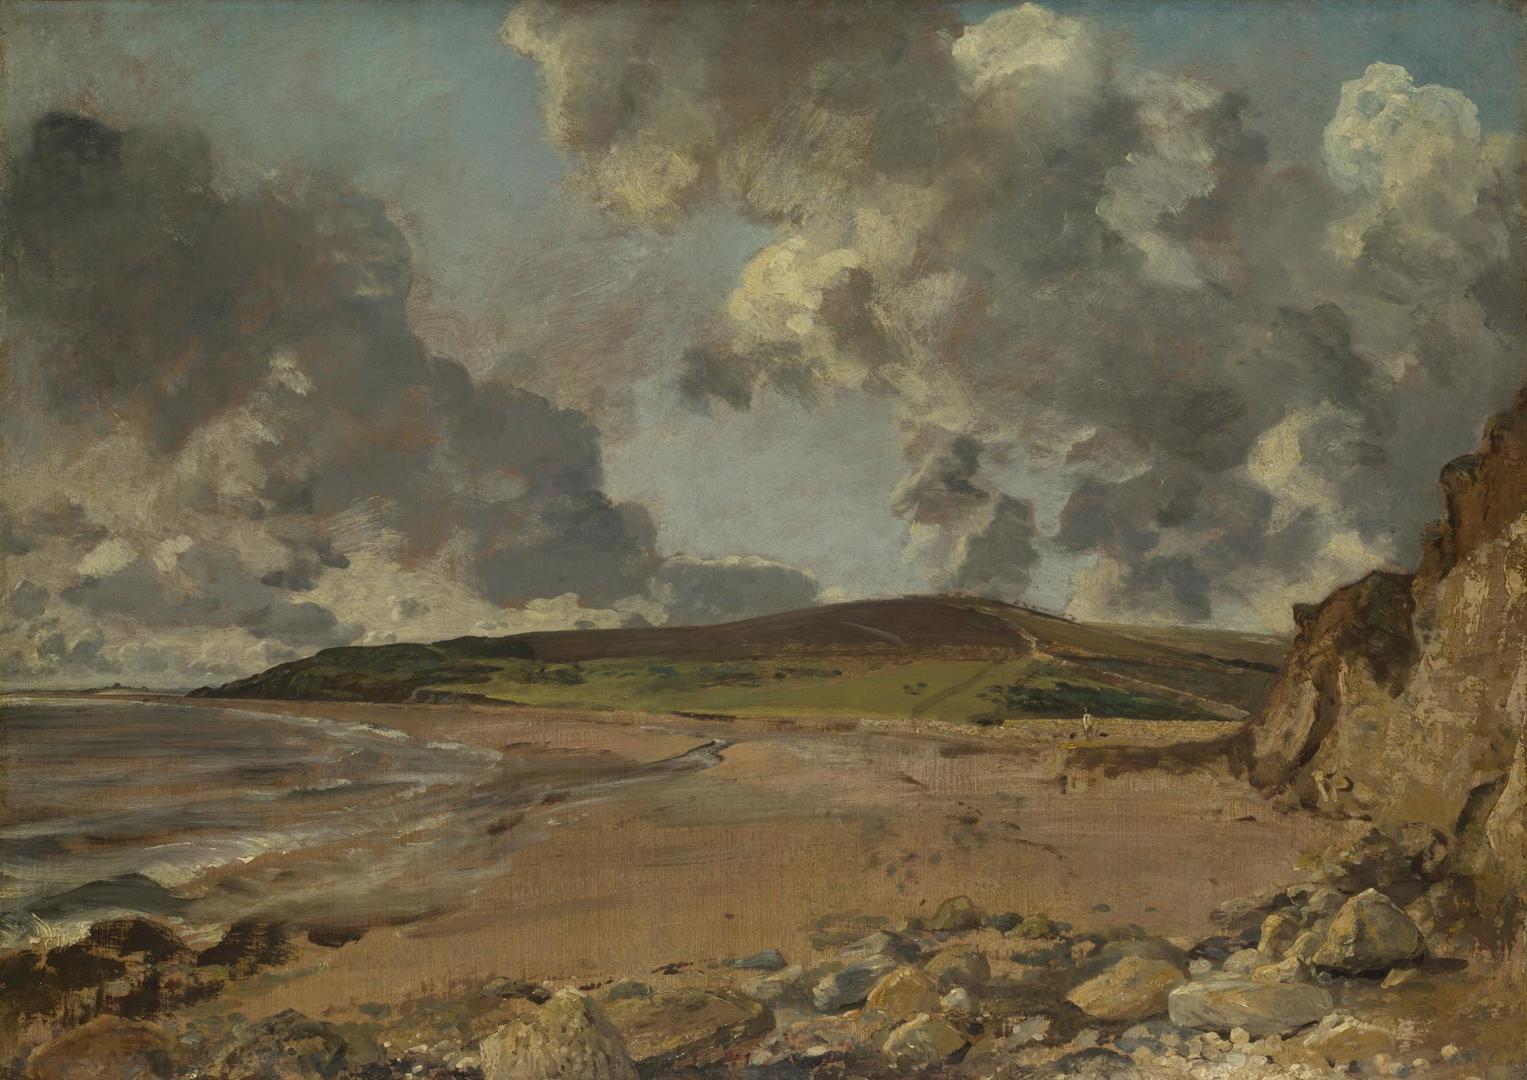 Weymouth Bay: Bowleaze Cove and Jordon Hill by John Constable